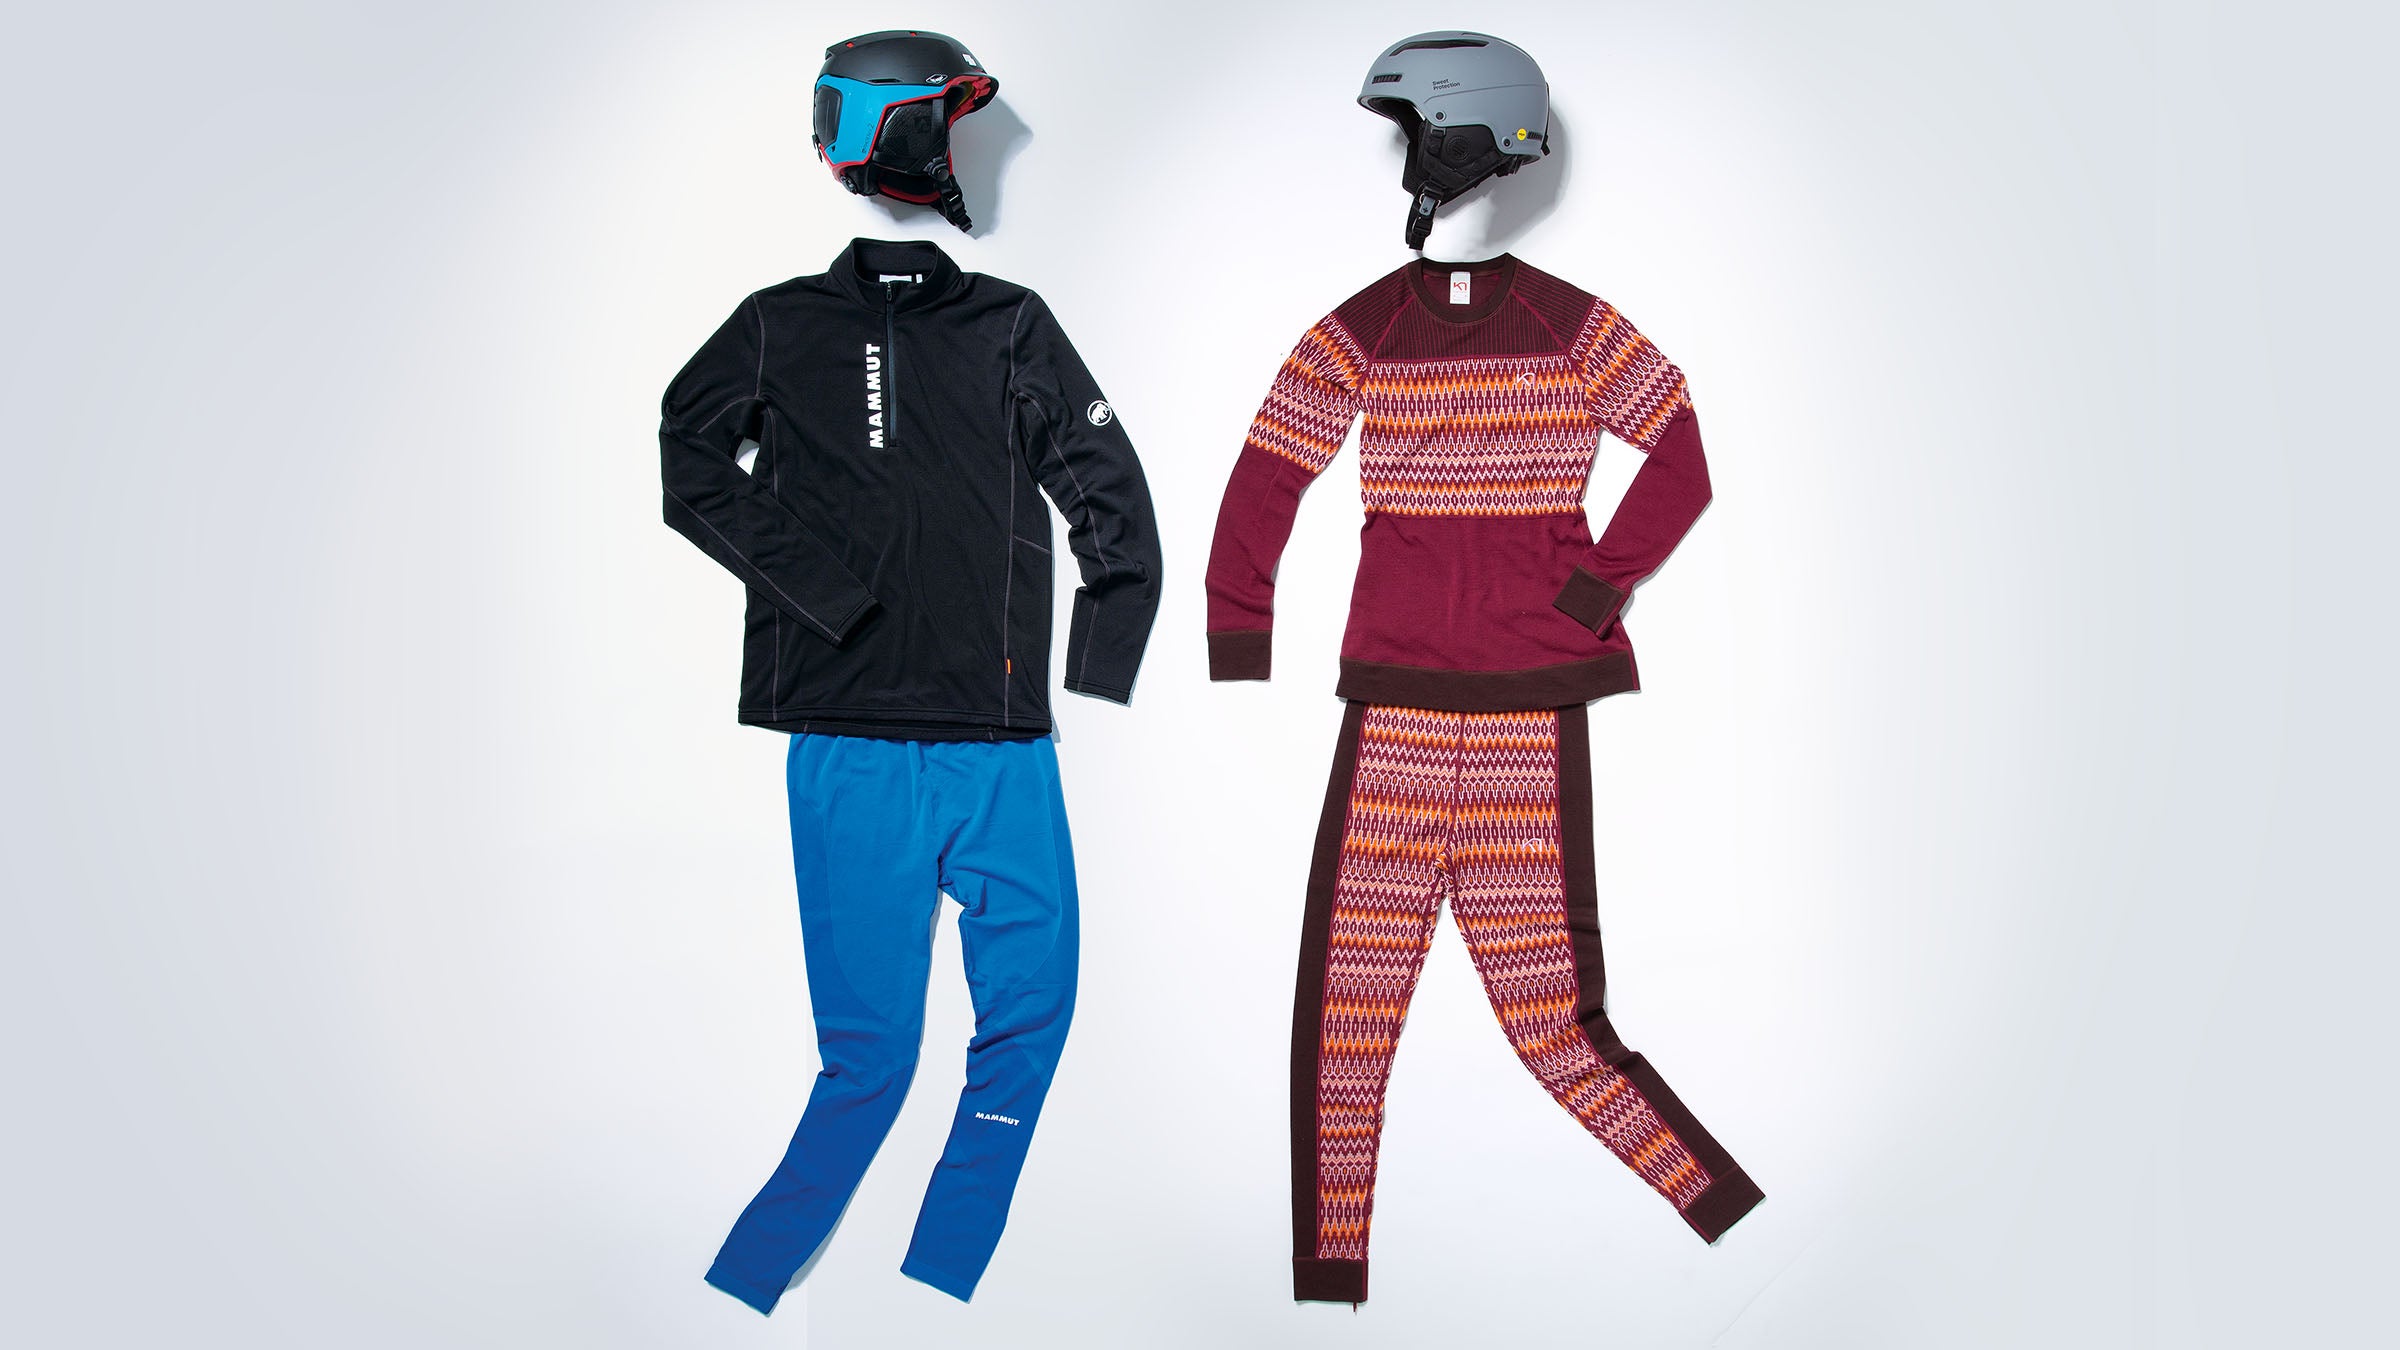 Ski Base Layers, Thermals For Skiing